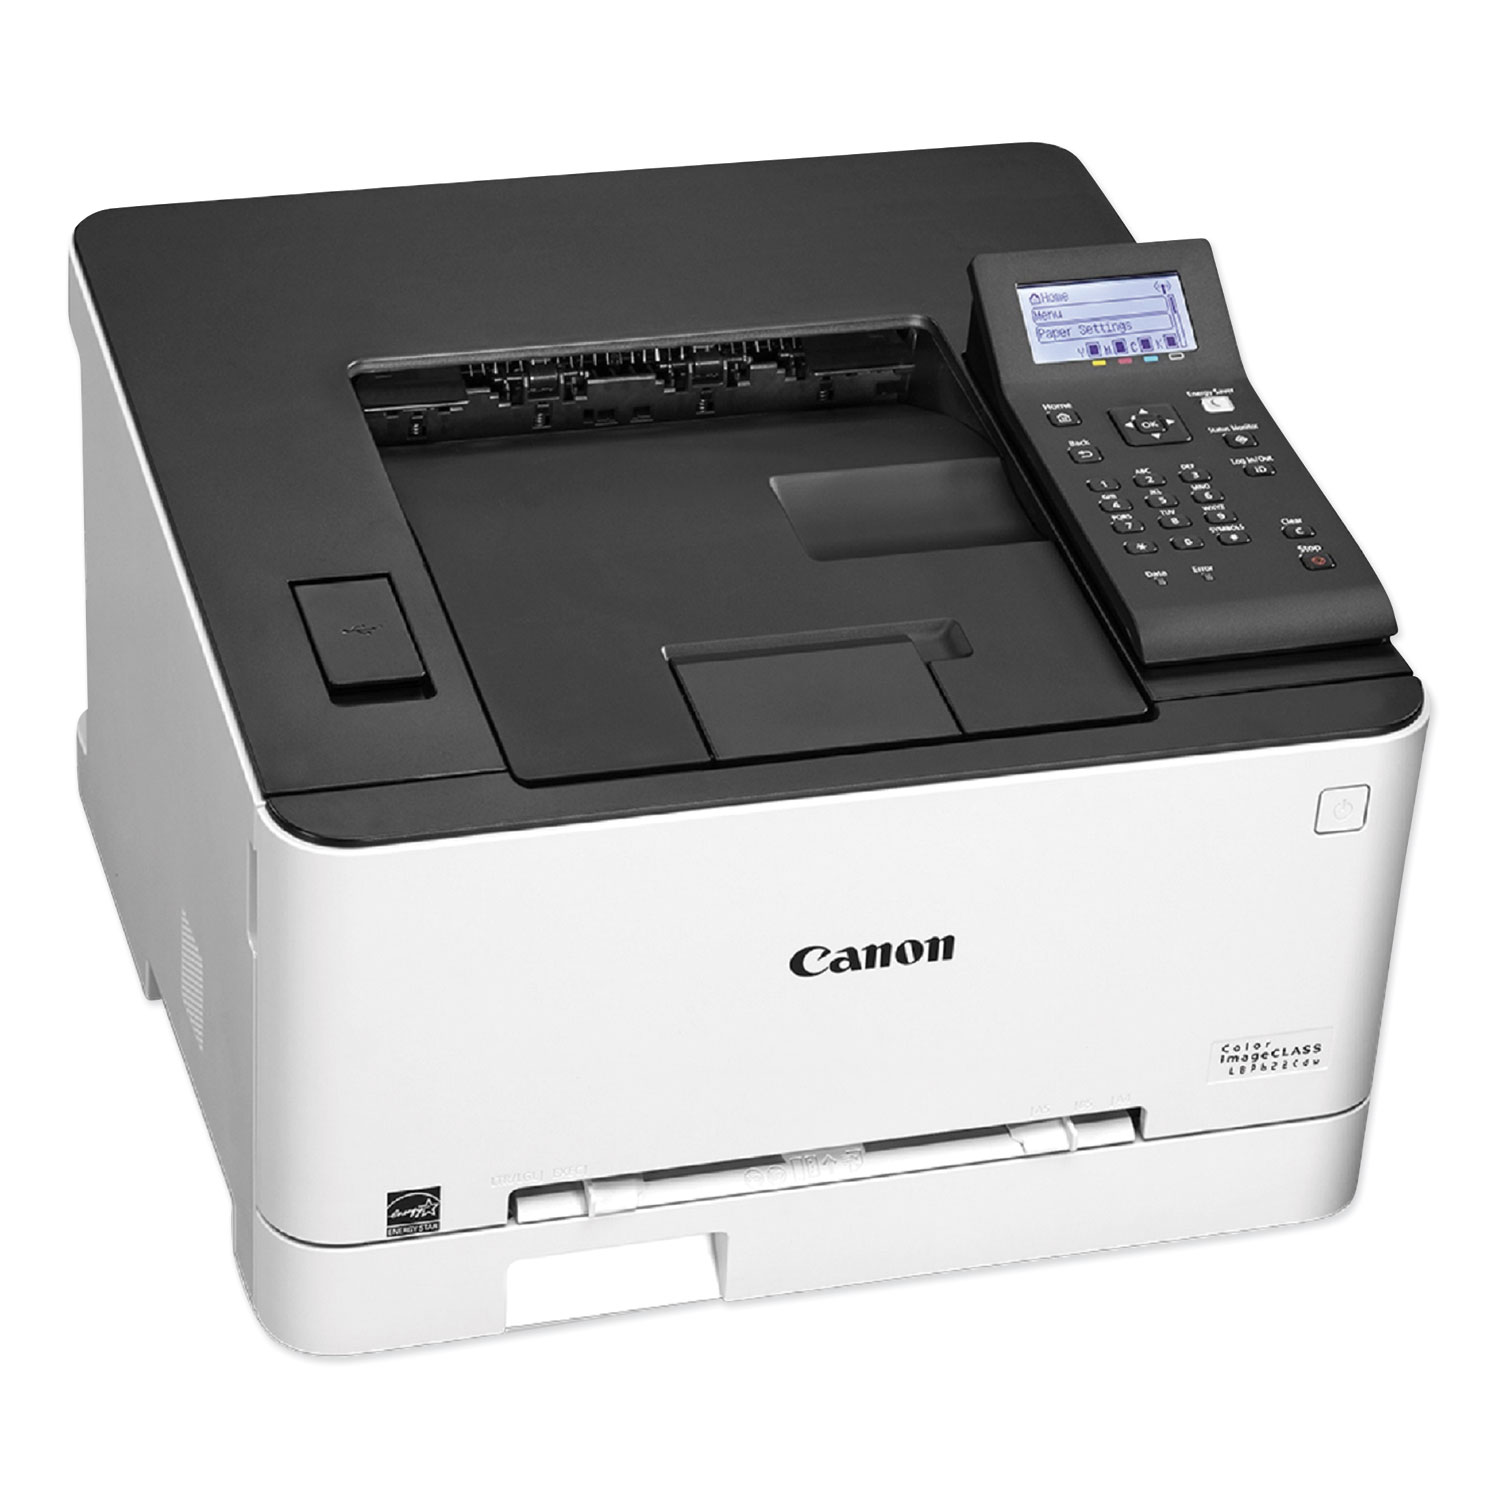 Canon, Cnmdrc225ii, Imageformula Sheetfed Scanner, Each